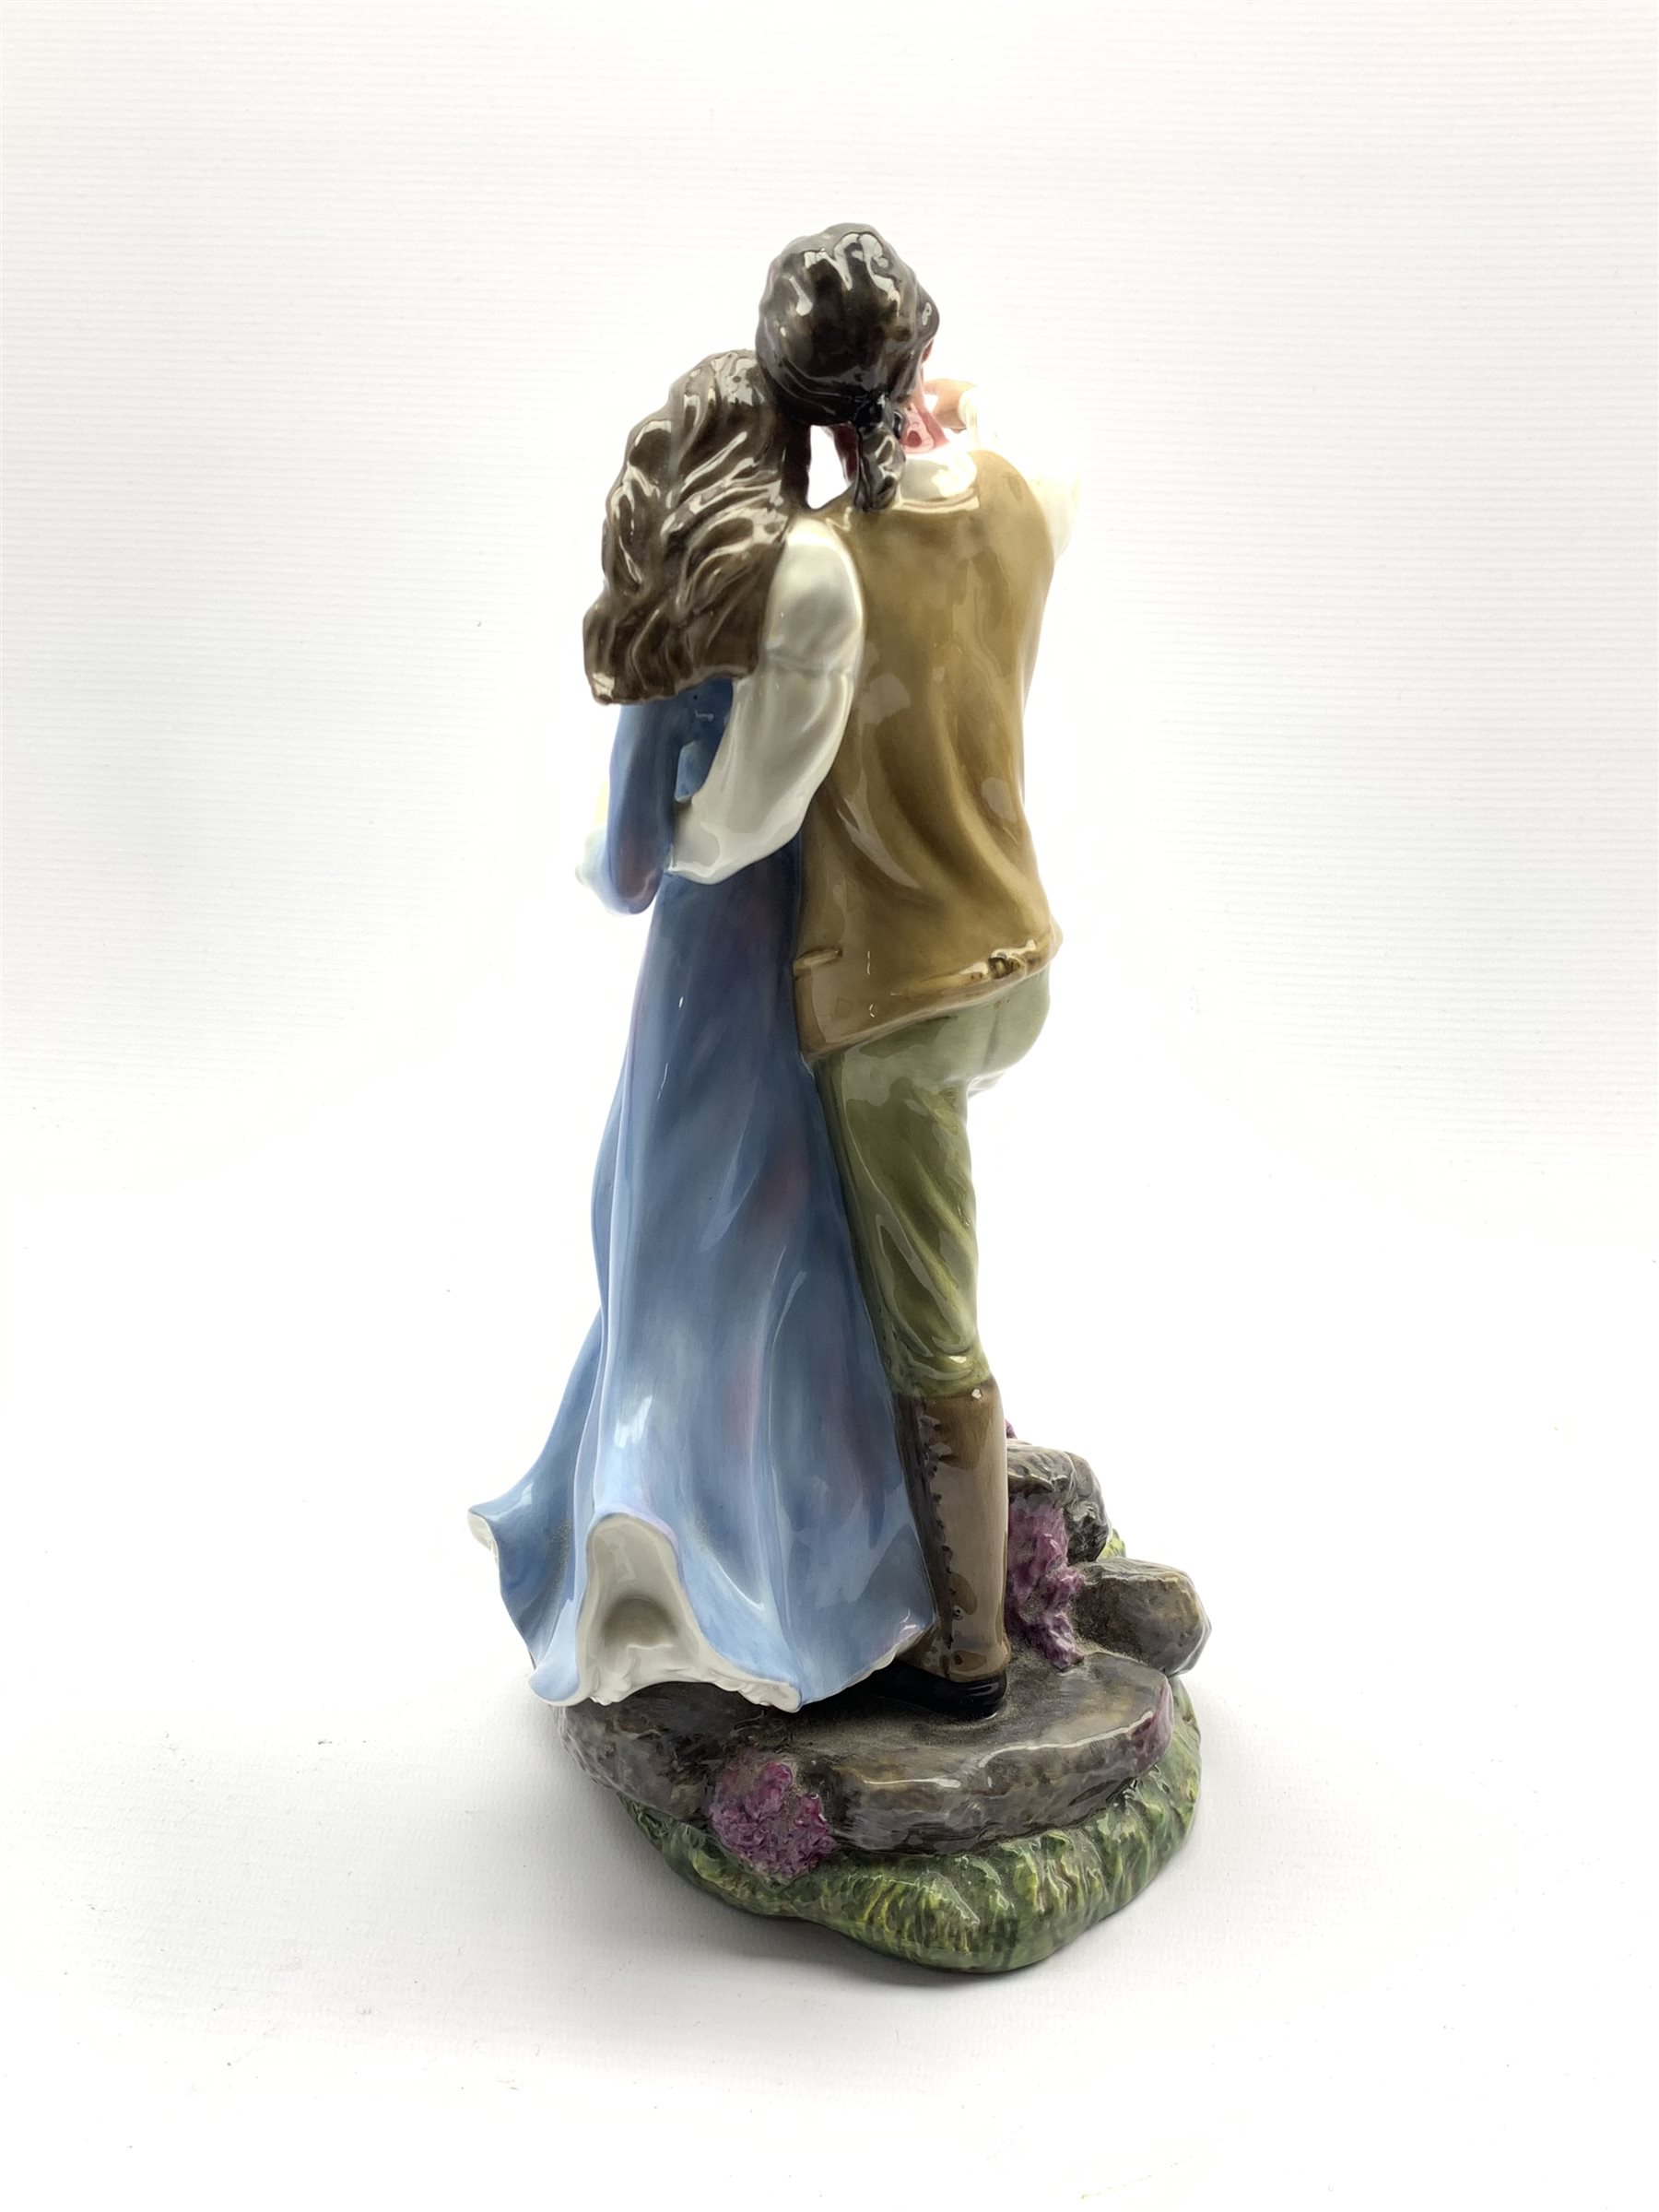 Royal Doulton limited edition figure 'Heathcliff and Cathy' HN4071, No. 185/750 with certificate - Image 2 of 3